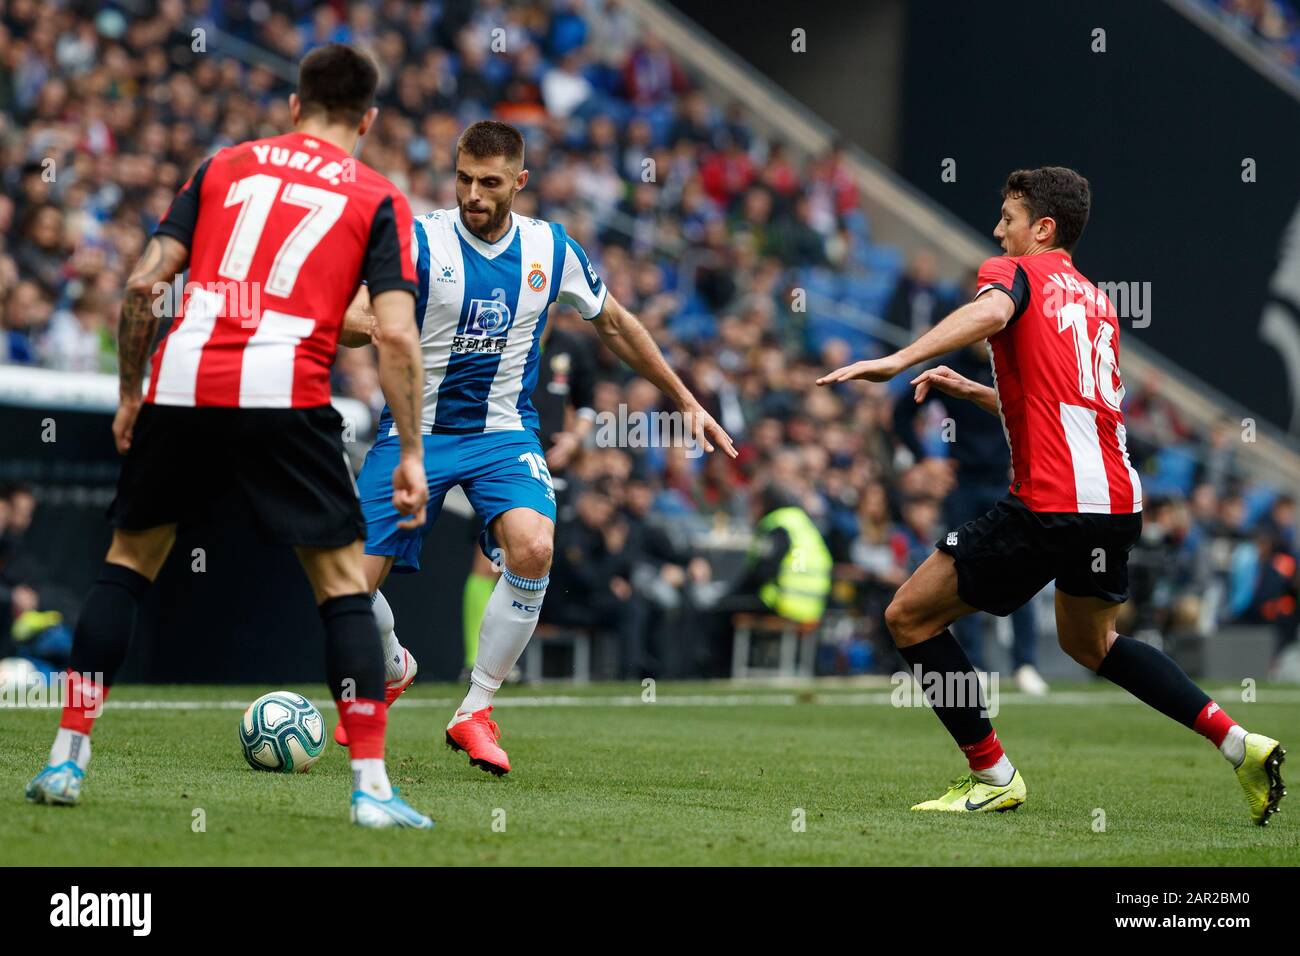 BARCELONA, SPAIN - JANUARY 24:.David Lopez of RCD Espanyol during the Liga match between RCD Espanyol and FC Barcelona at RCD Stadium on January 24, 2020 in Barcelona, Spain. (Photo by DAX/ESPA-Images) Stock Photo